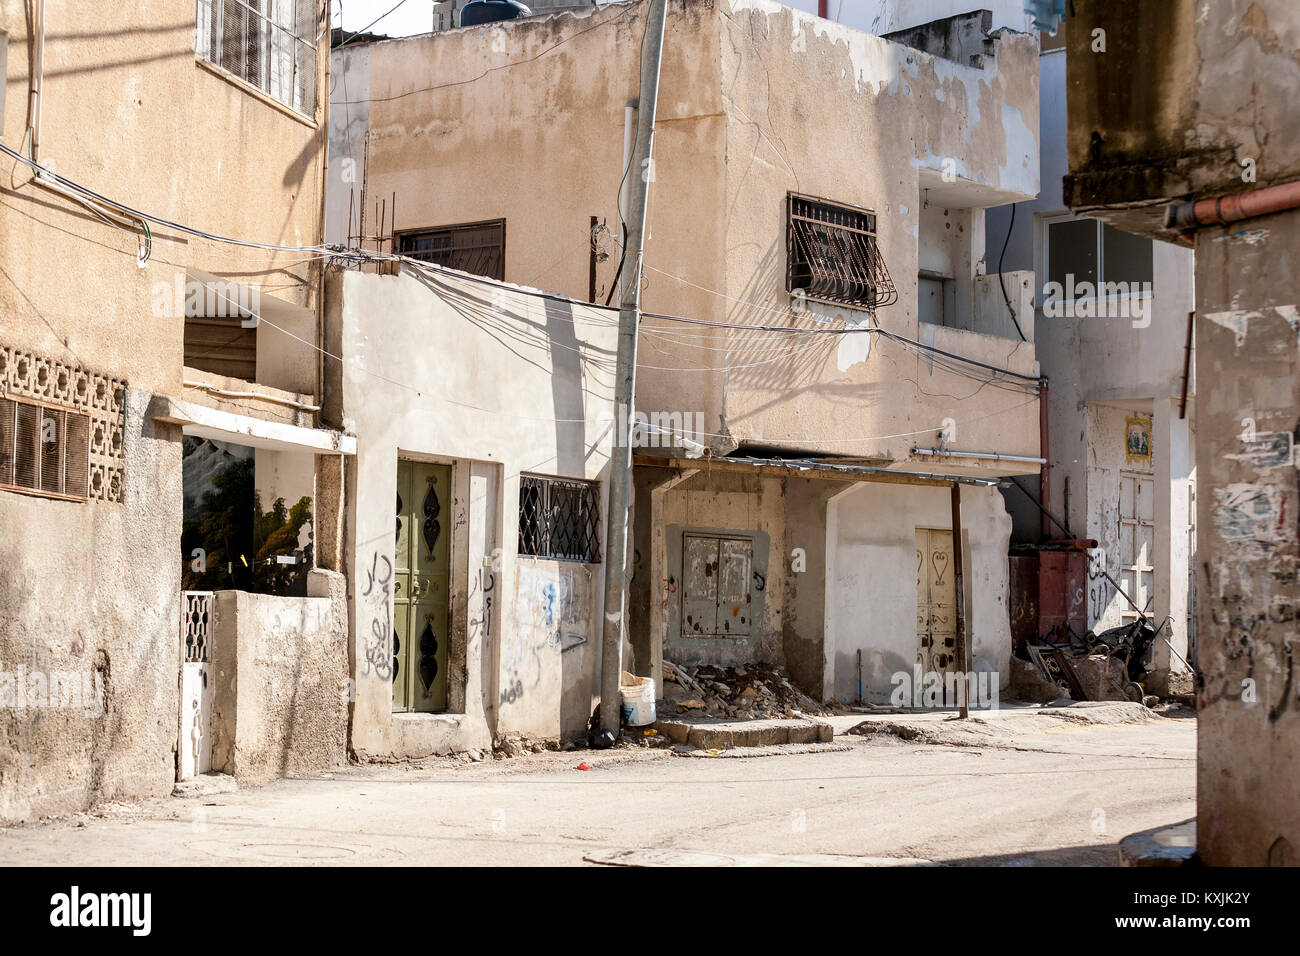 Jenin, Palestine, January 11, 2011: Street in Jenin refugee camp. Most of the houses are in poor condition. Stock Photo